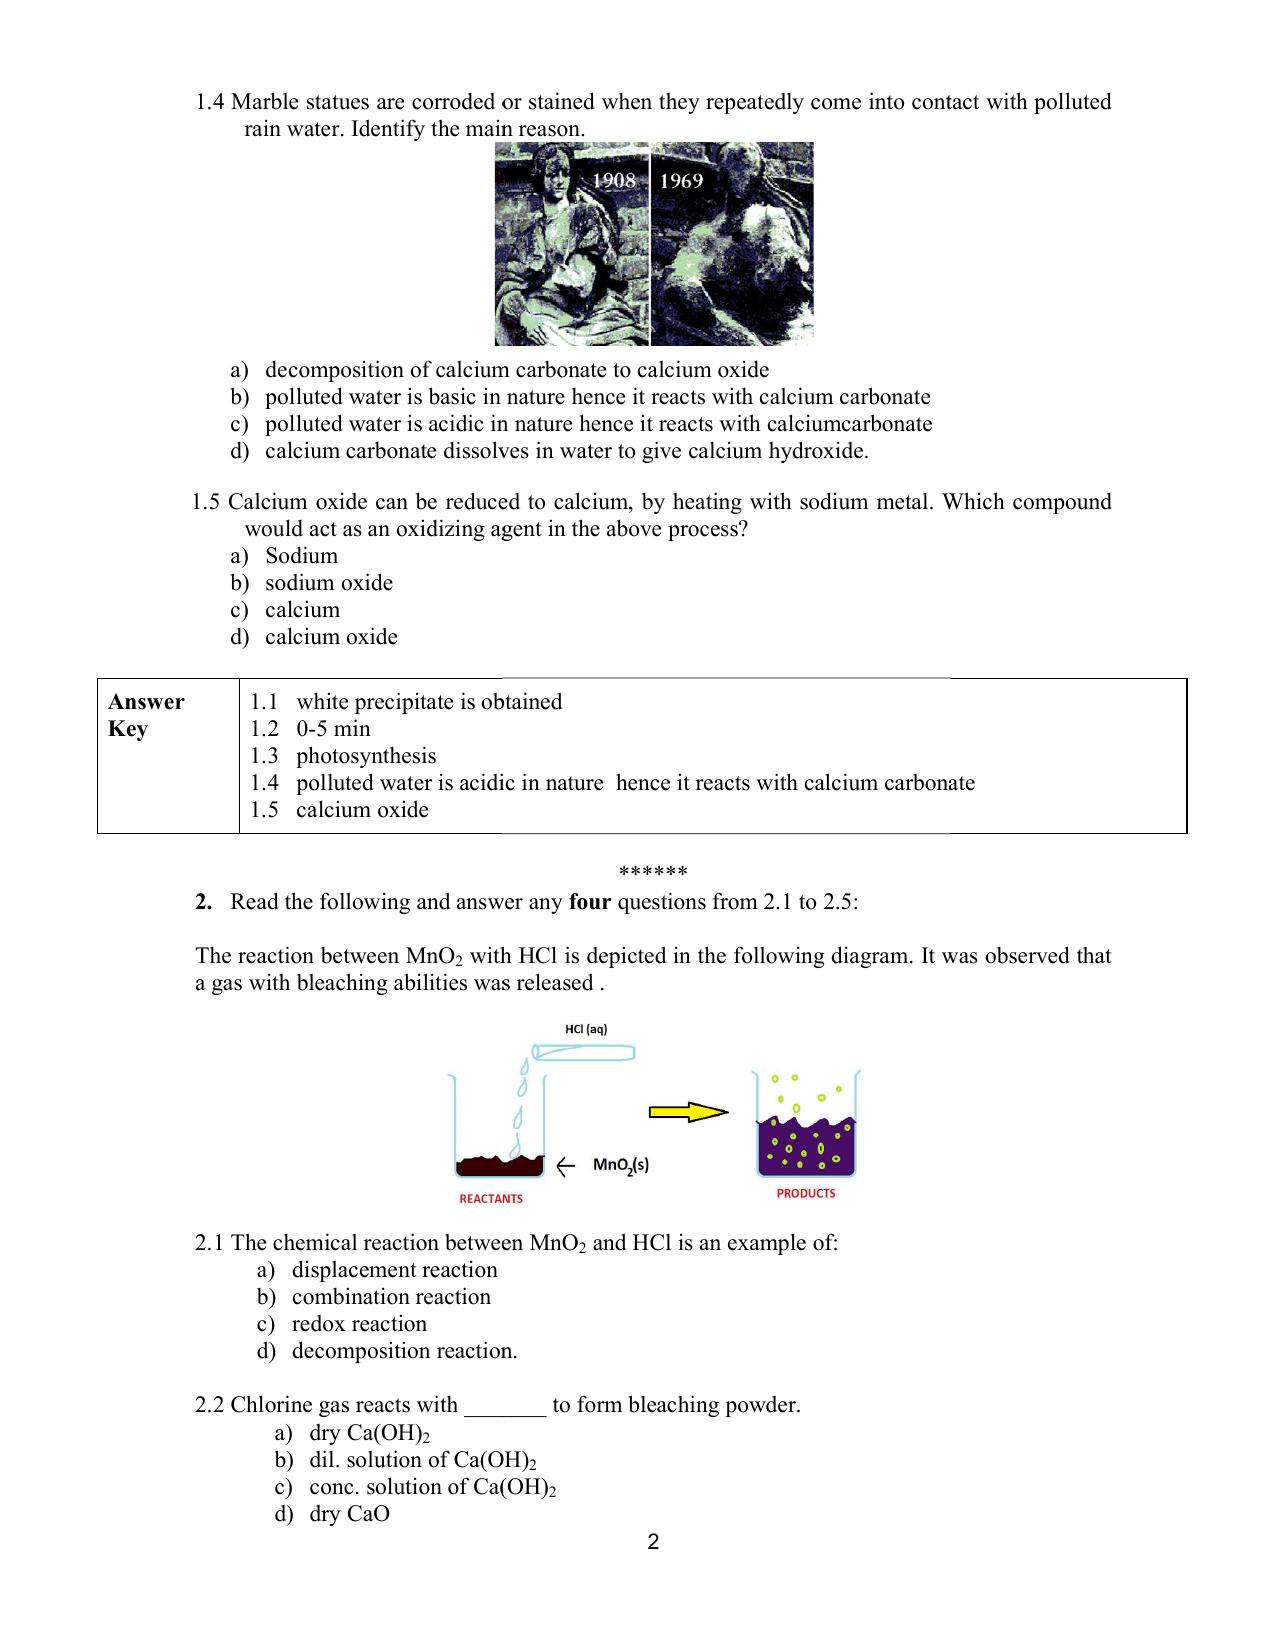 CBSE Class 10 Science Question Bank - Page 2